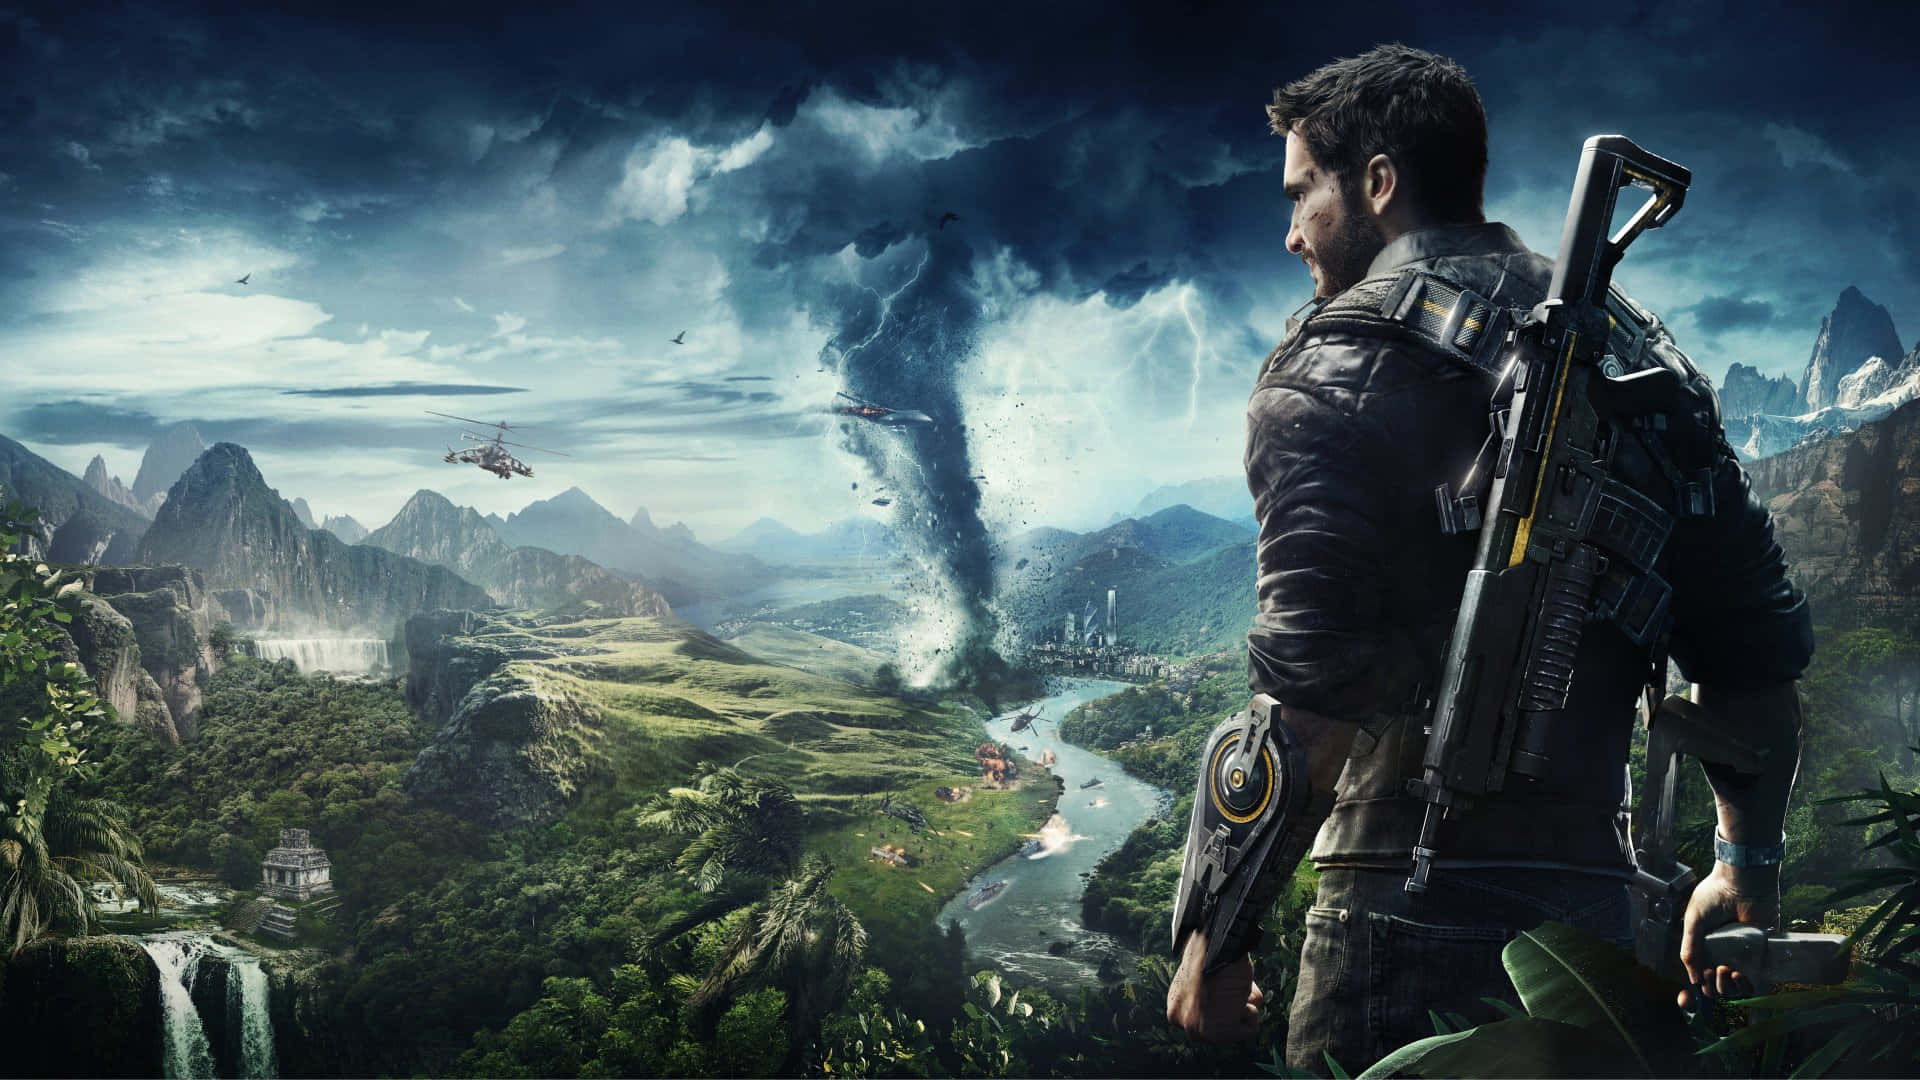 Rico exploring the South American jungle of Medici in Just Cause 4